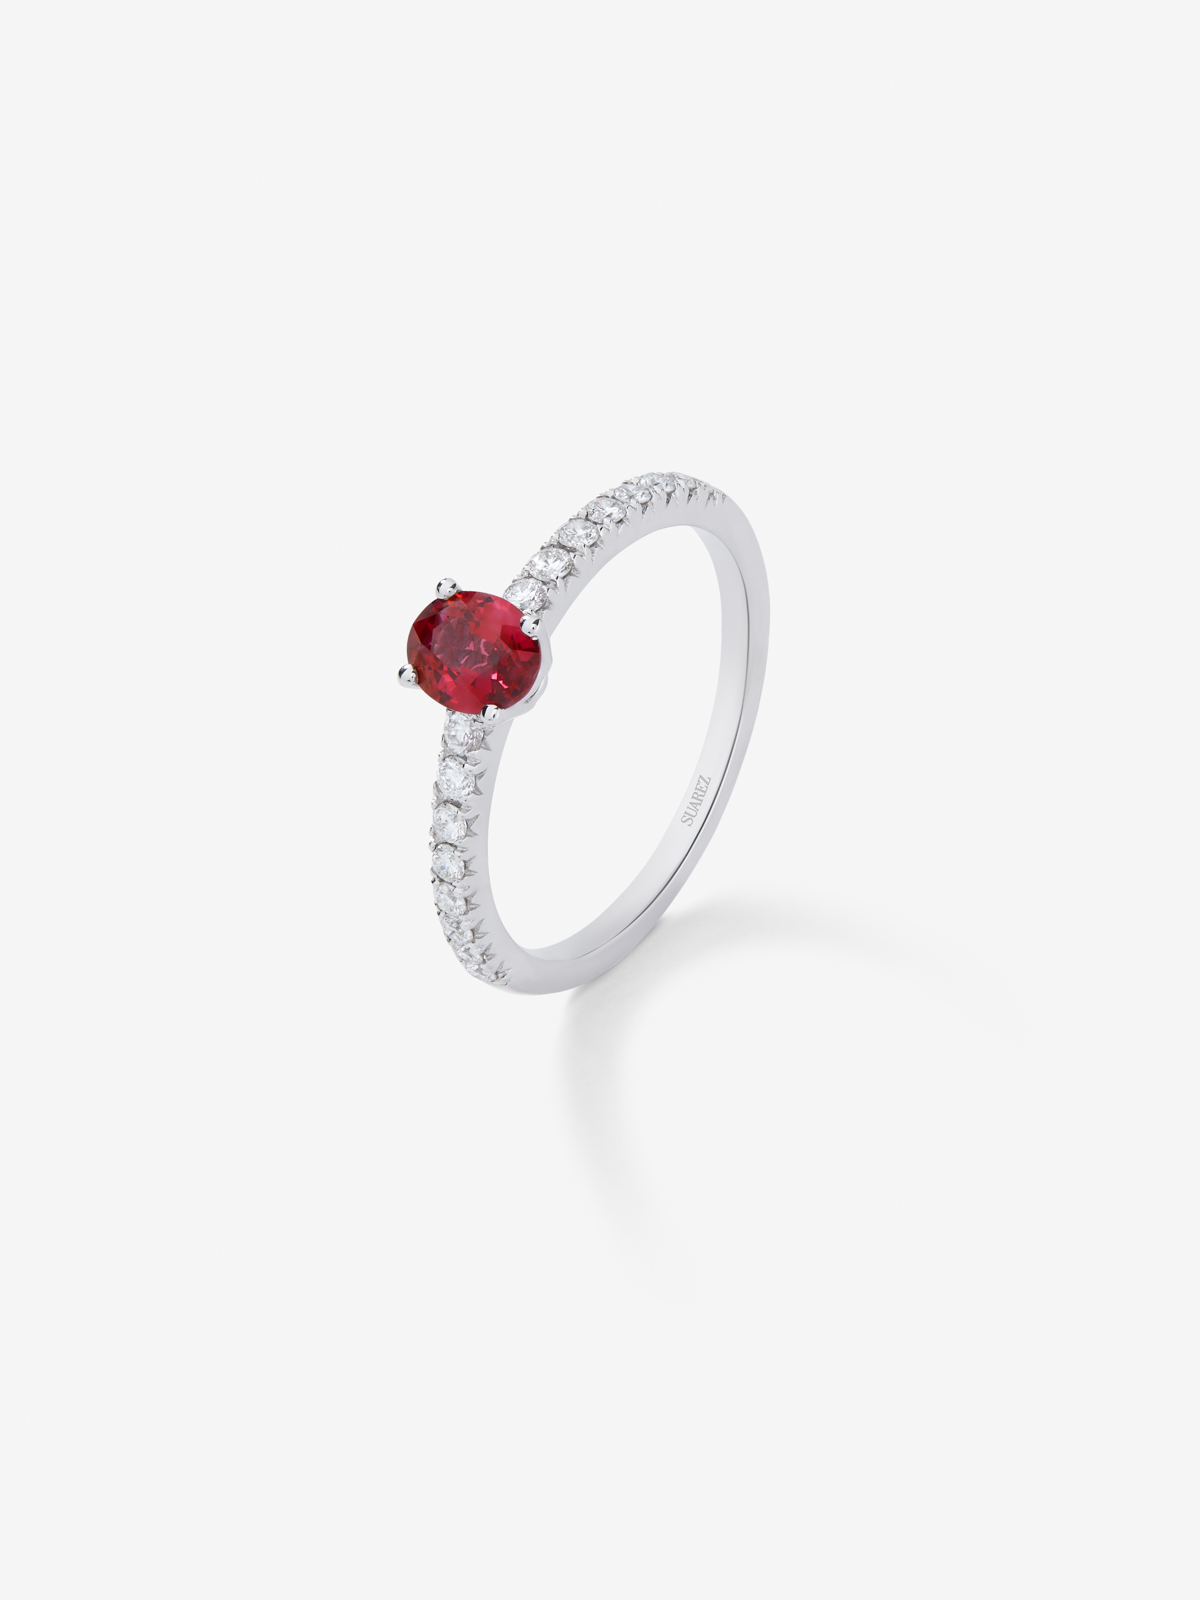 18K White Gold Ring with Red Ruby in 0.55 cts oval size and white 0.1 cts bright diamonds